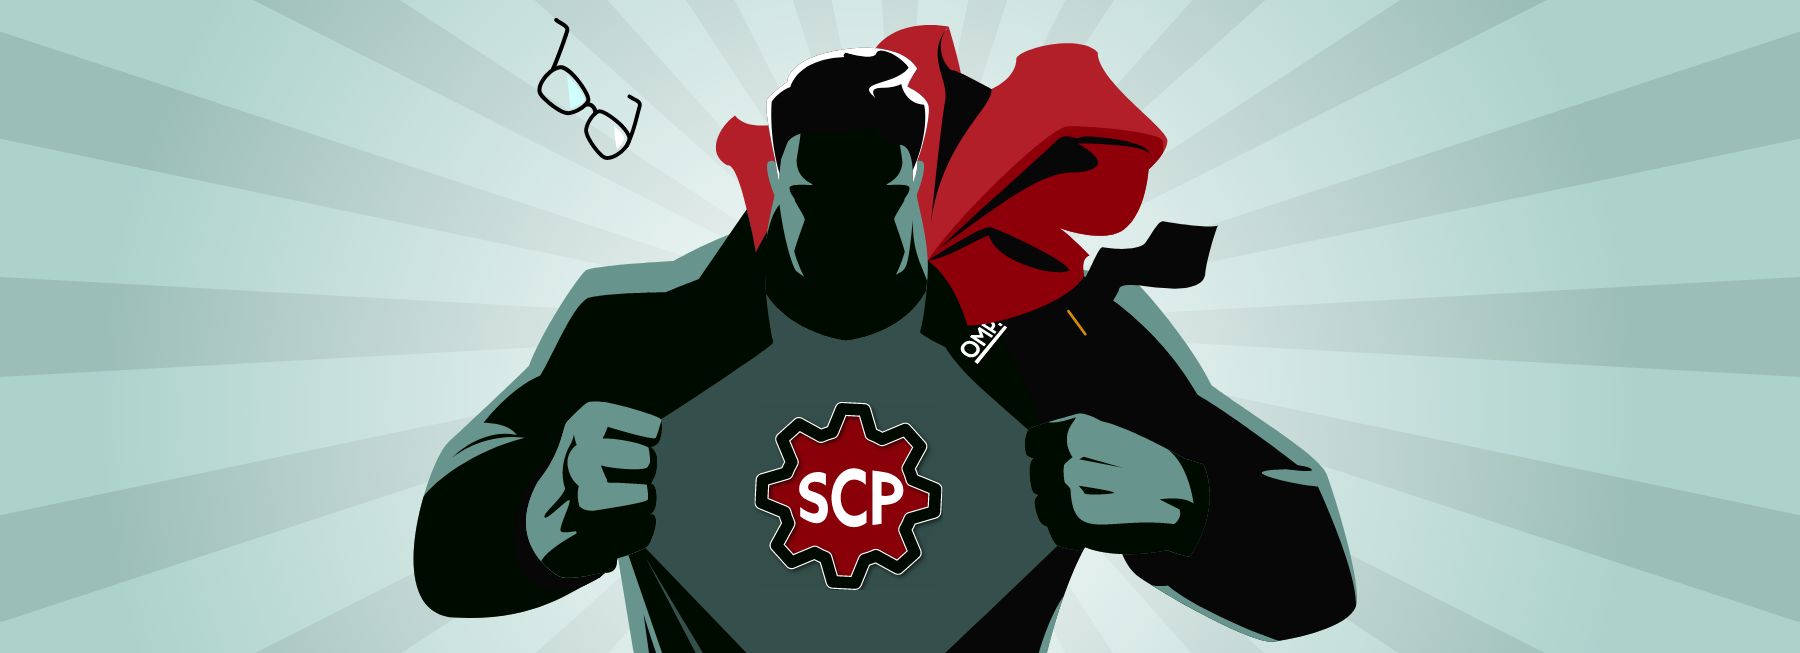 The supply chain professional of the future: super-human or team player?